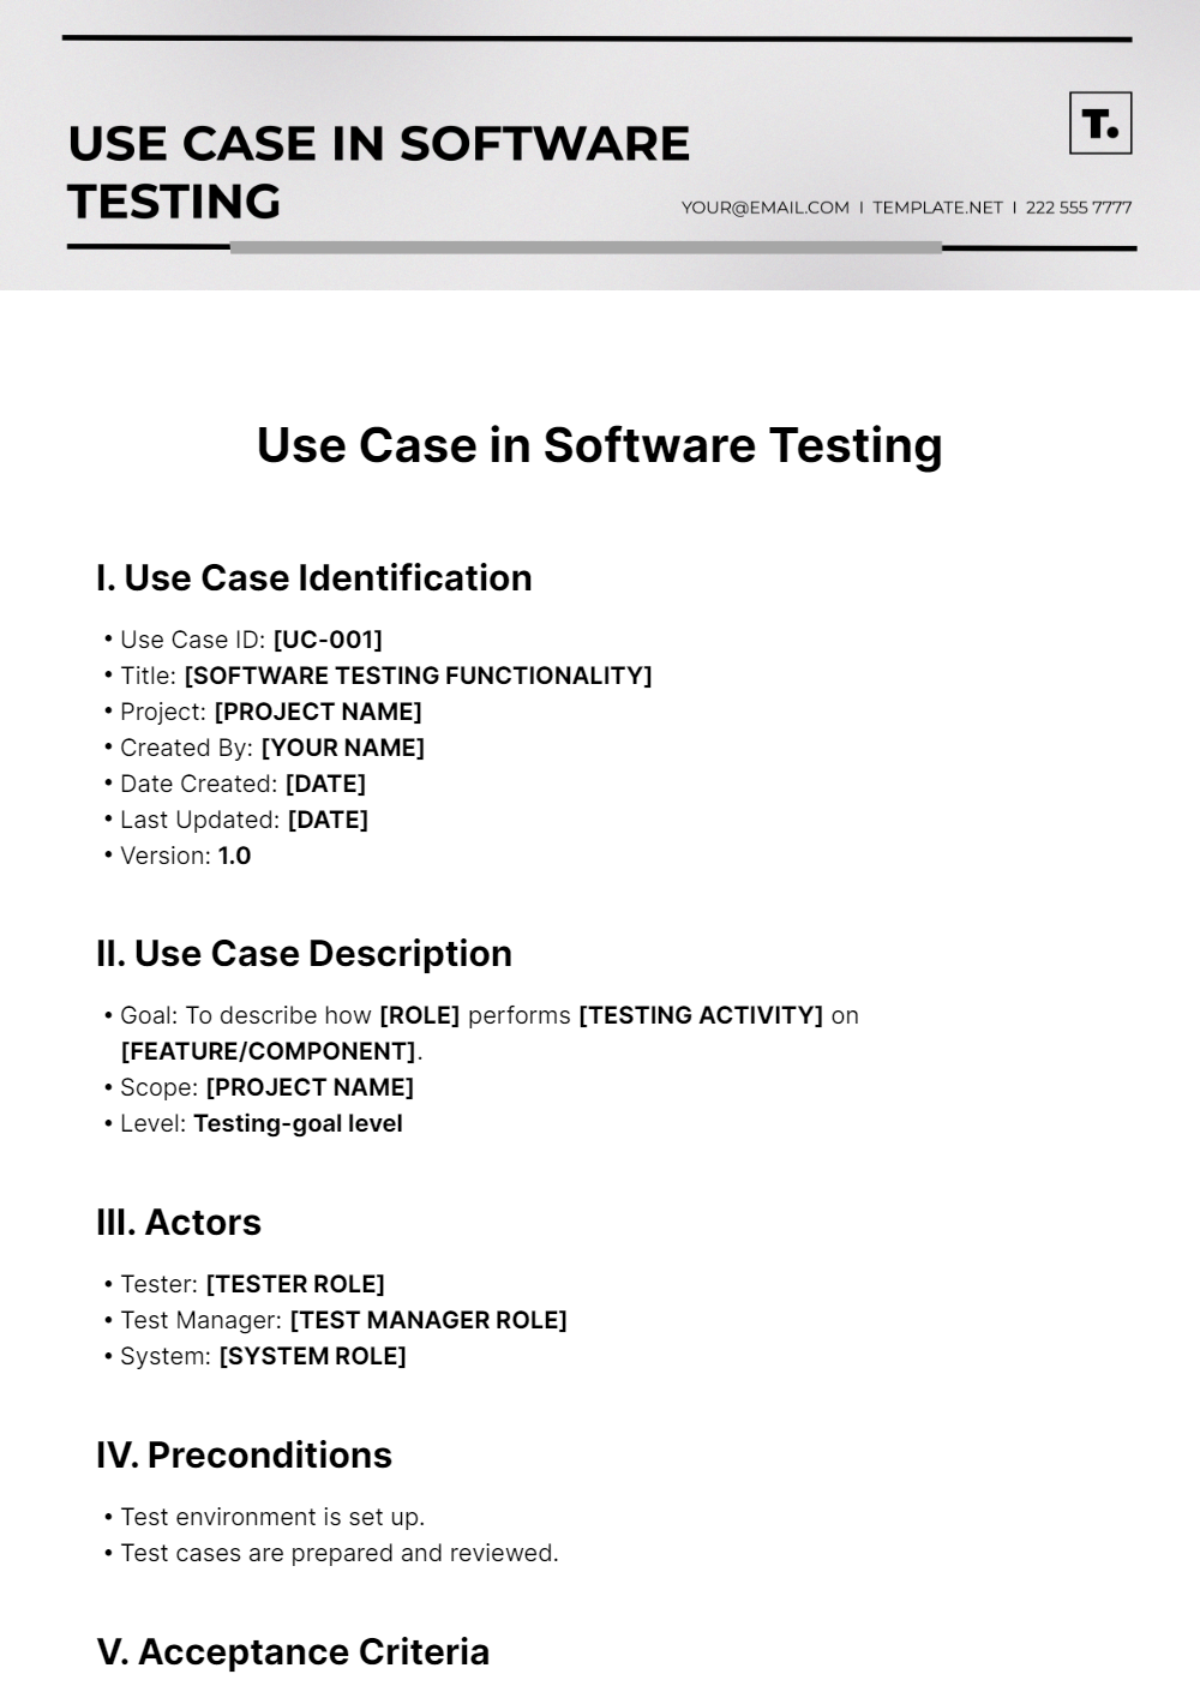 Free Use Case in Software Testing Template